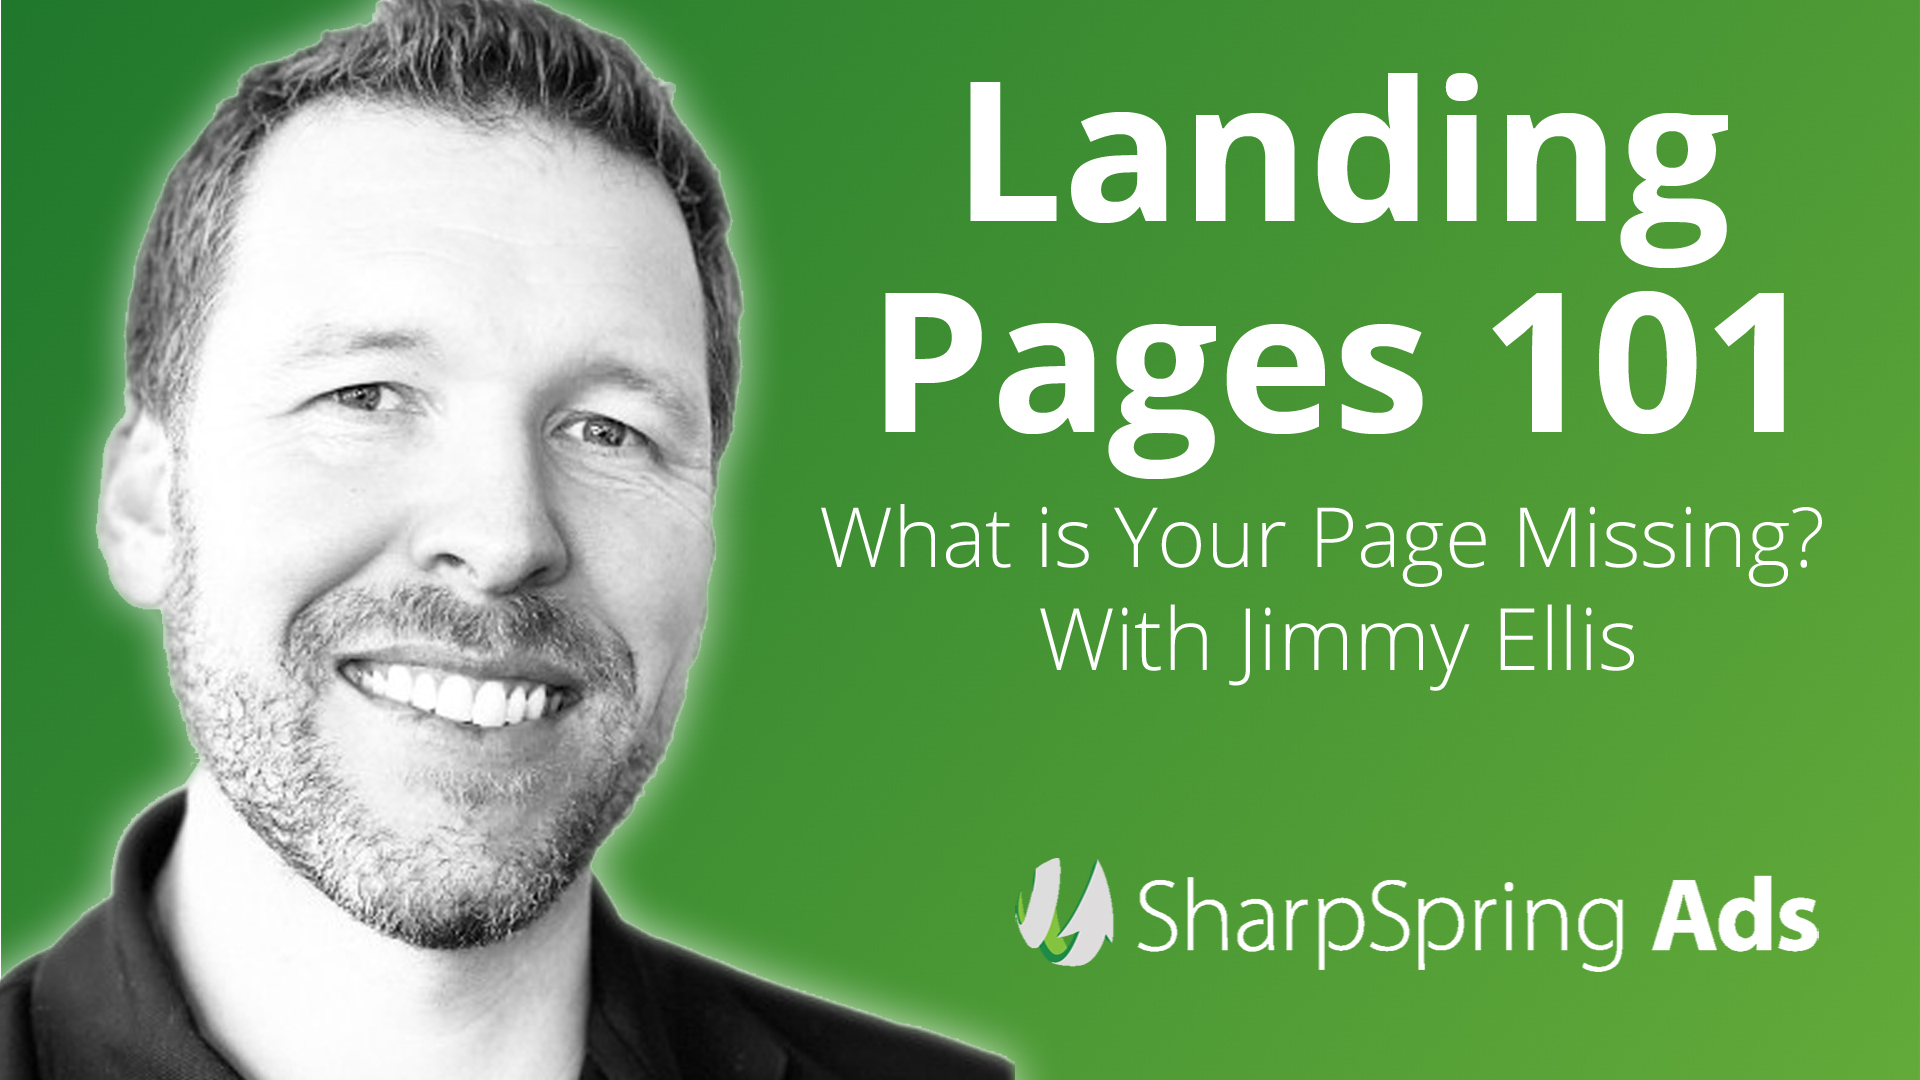 Landing Pages 101 – Who is this page REALLY for?